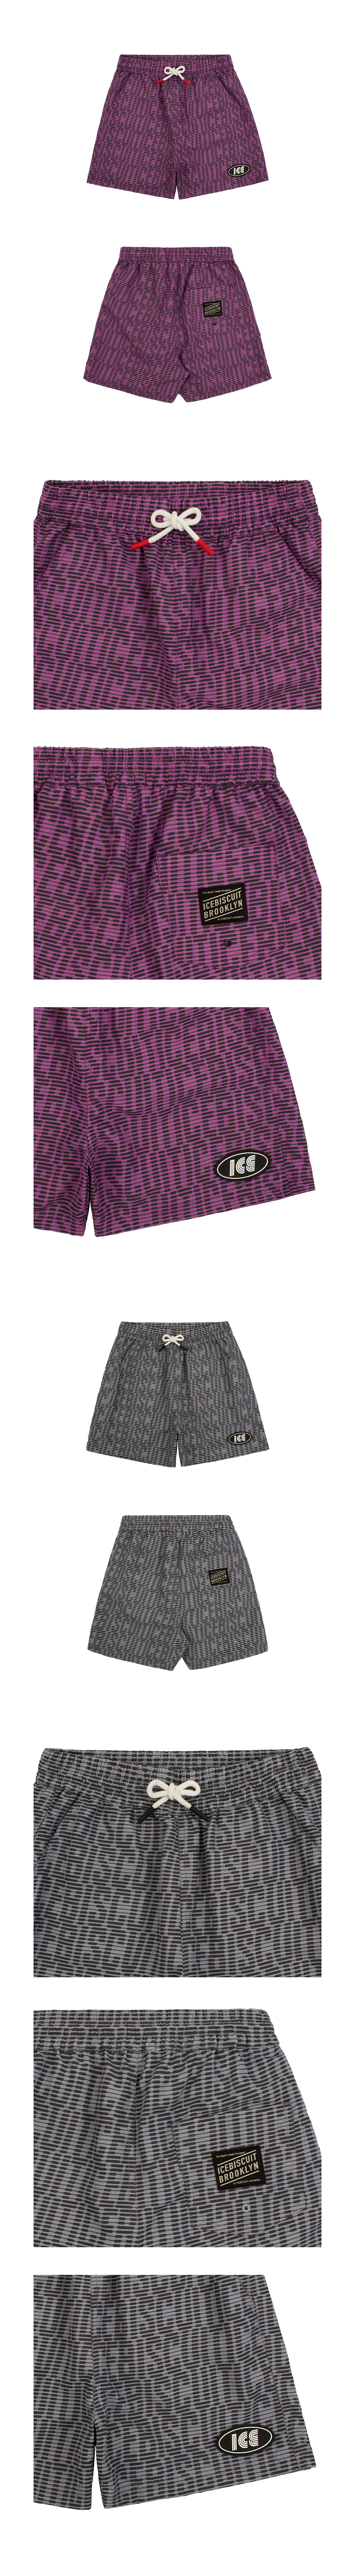 Icebiscuit letter printed nylon shorts 상세 이미지